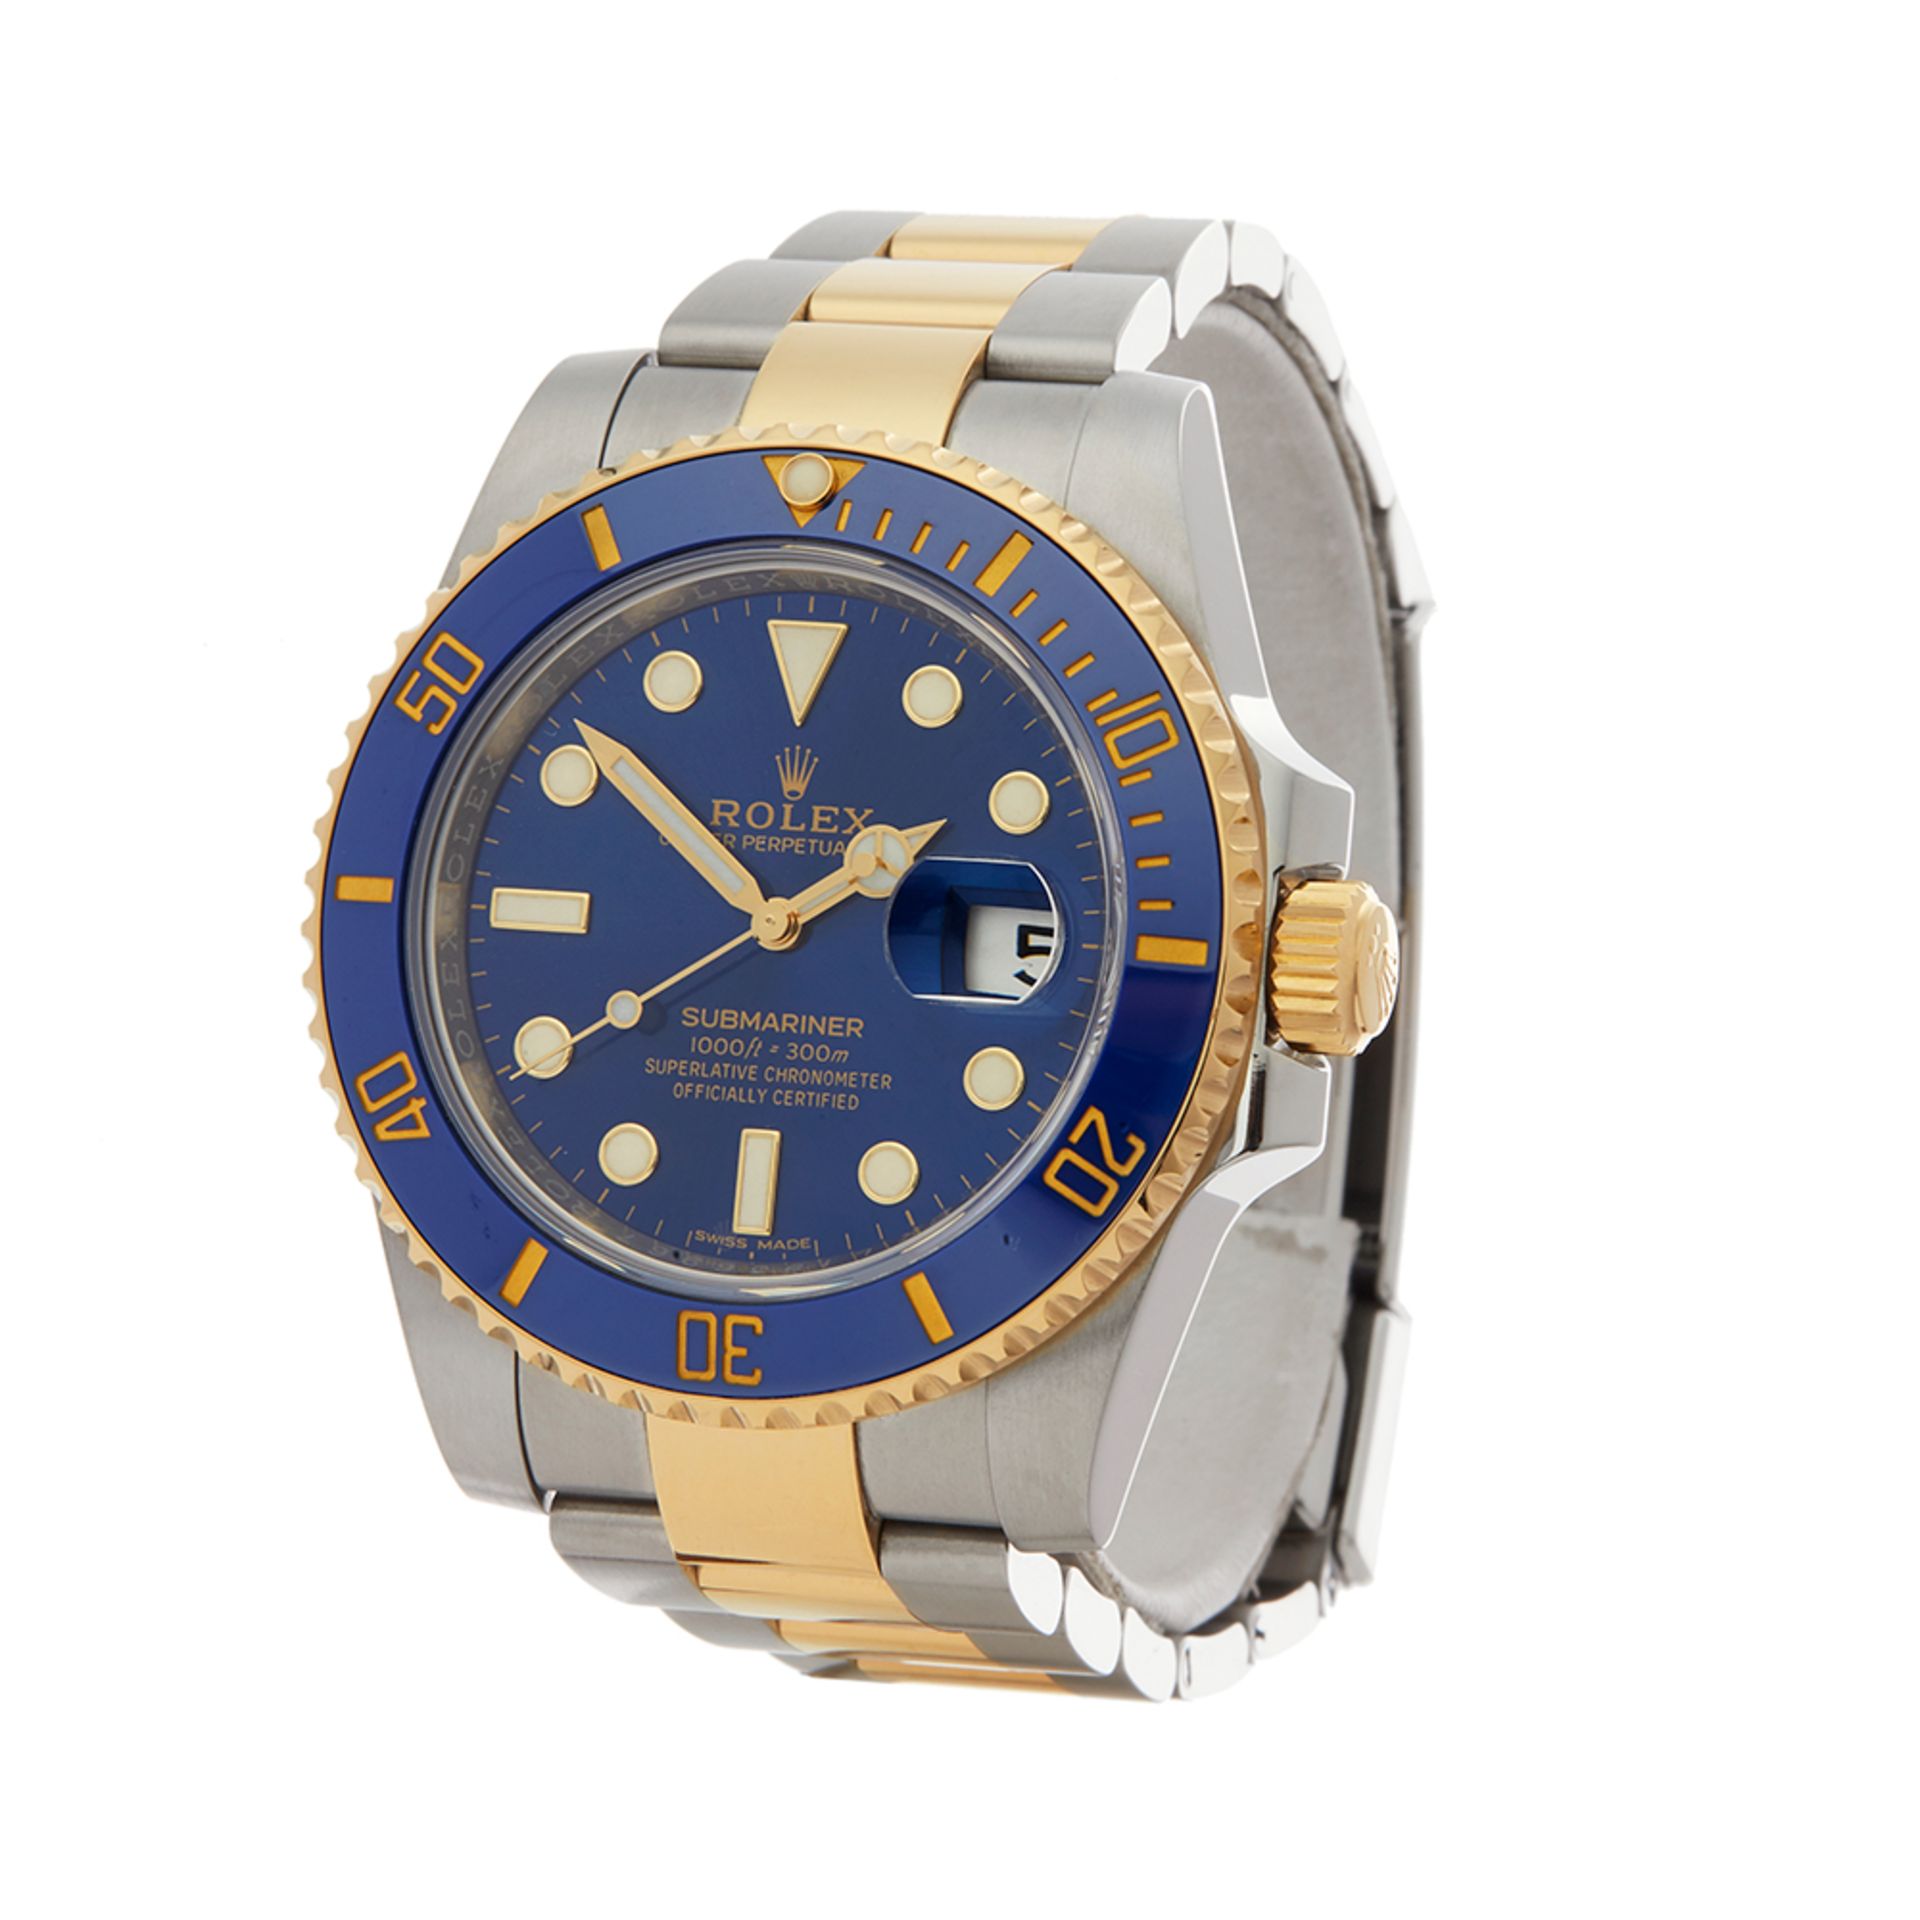 Submariner Stainless Steel & 18K Yellow Gold - 116613LB - Image 3 of 8